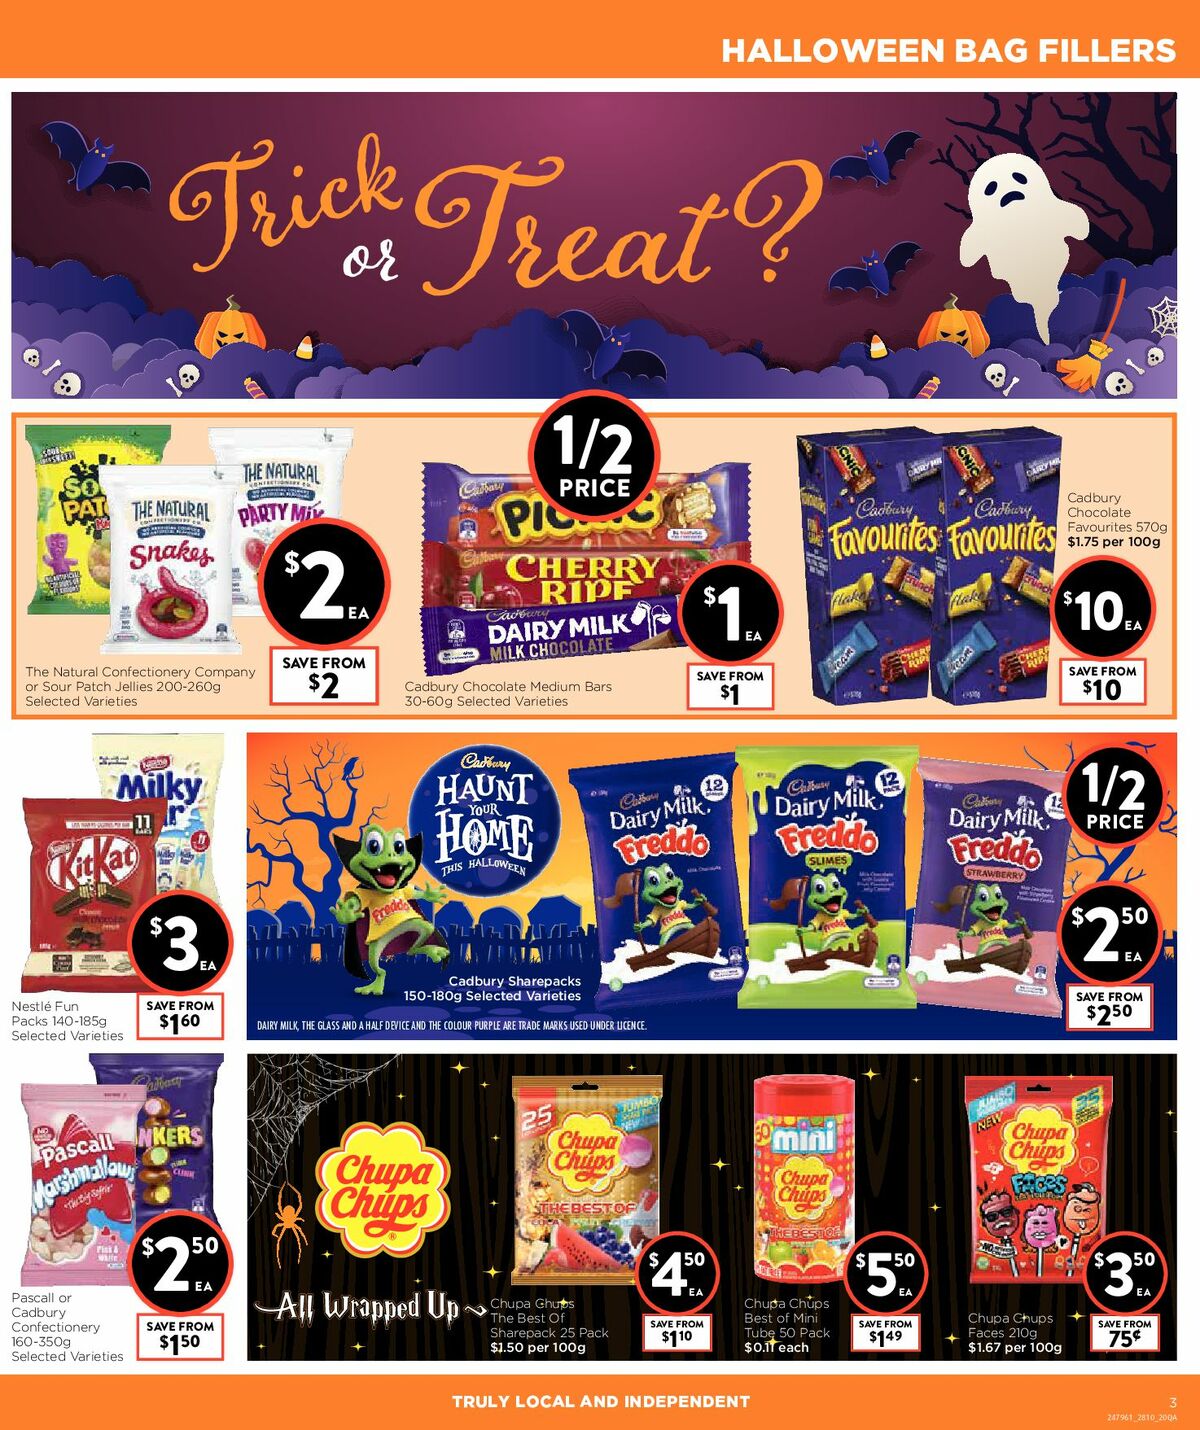 FoodWorks Supermarket Catalogues from 28 October